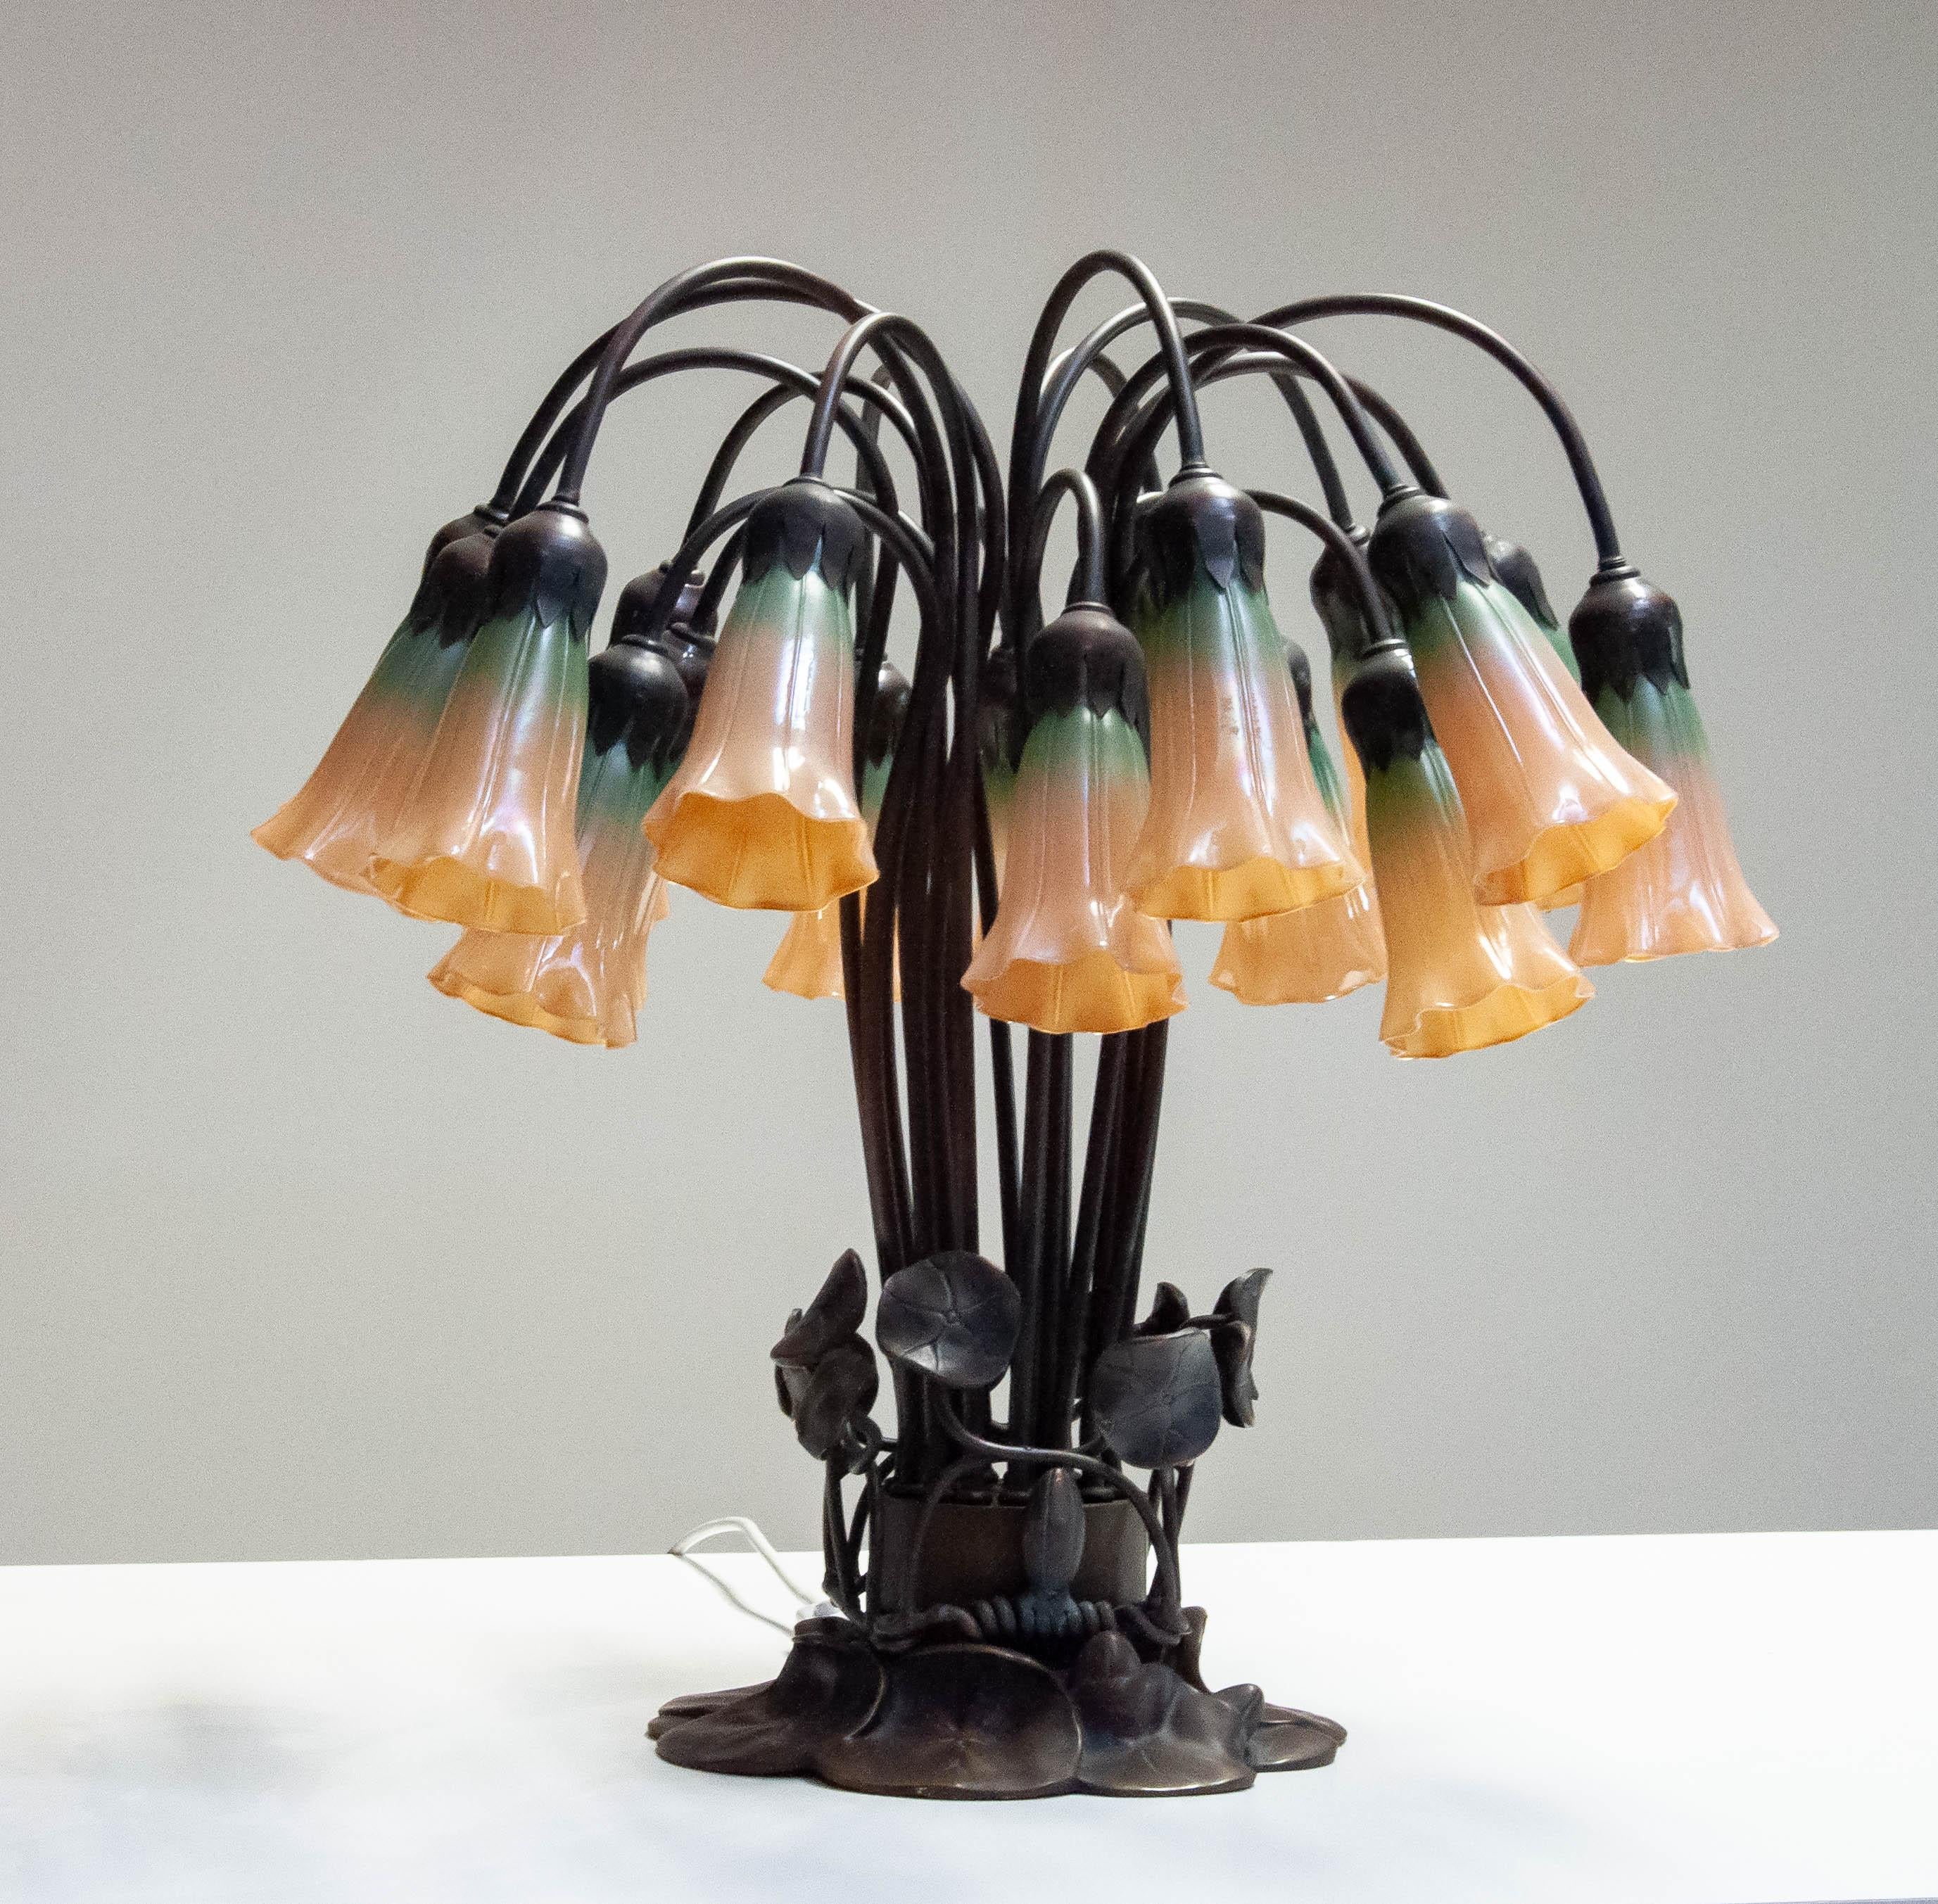 Art Nouveau 1980s In The Manner Of Tiffany 'Lilly' Table Lamp Bronze And 18 Art Glass Shades